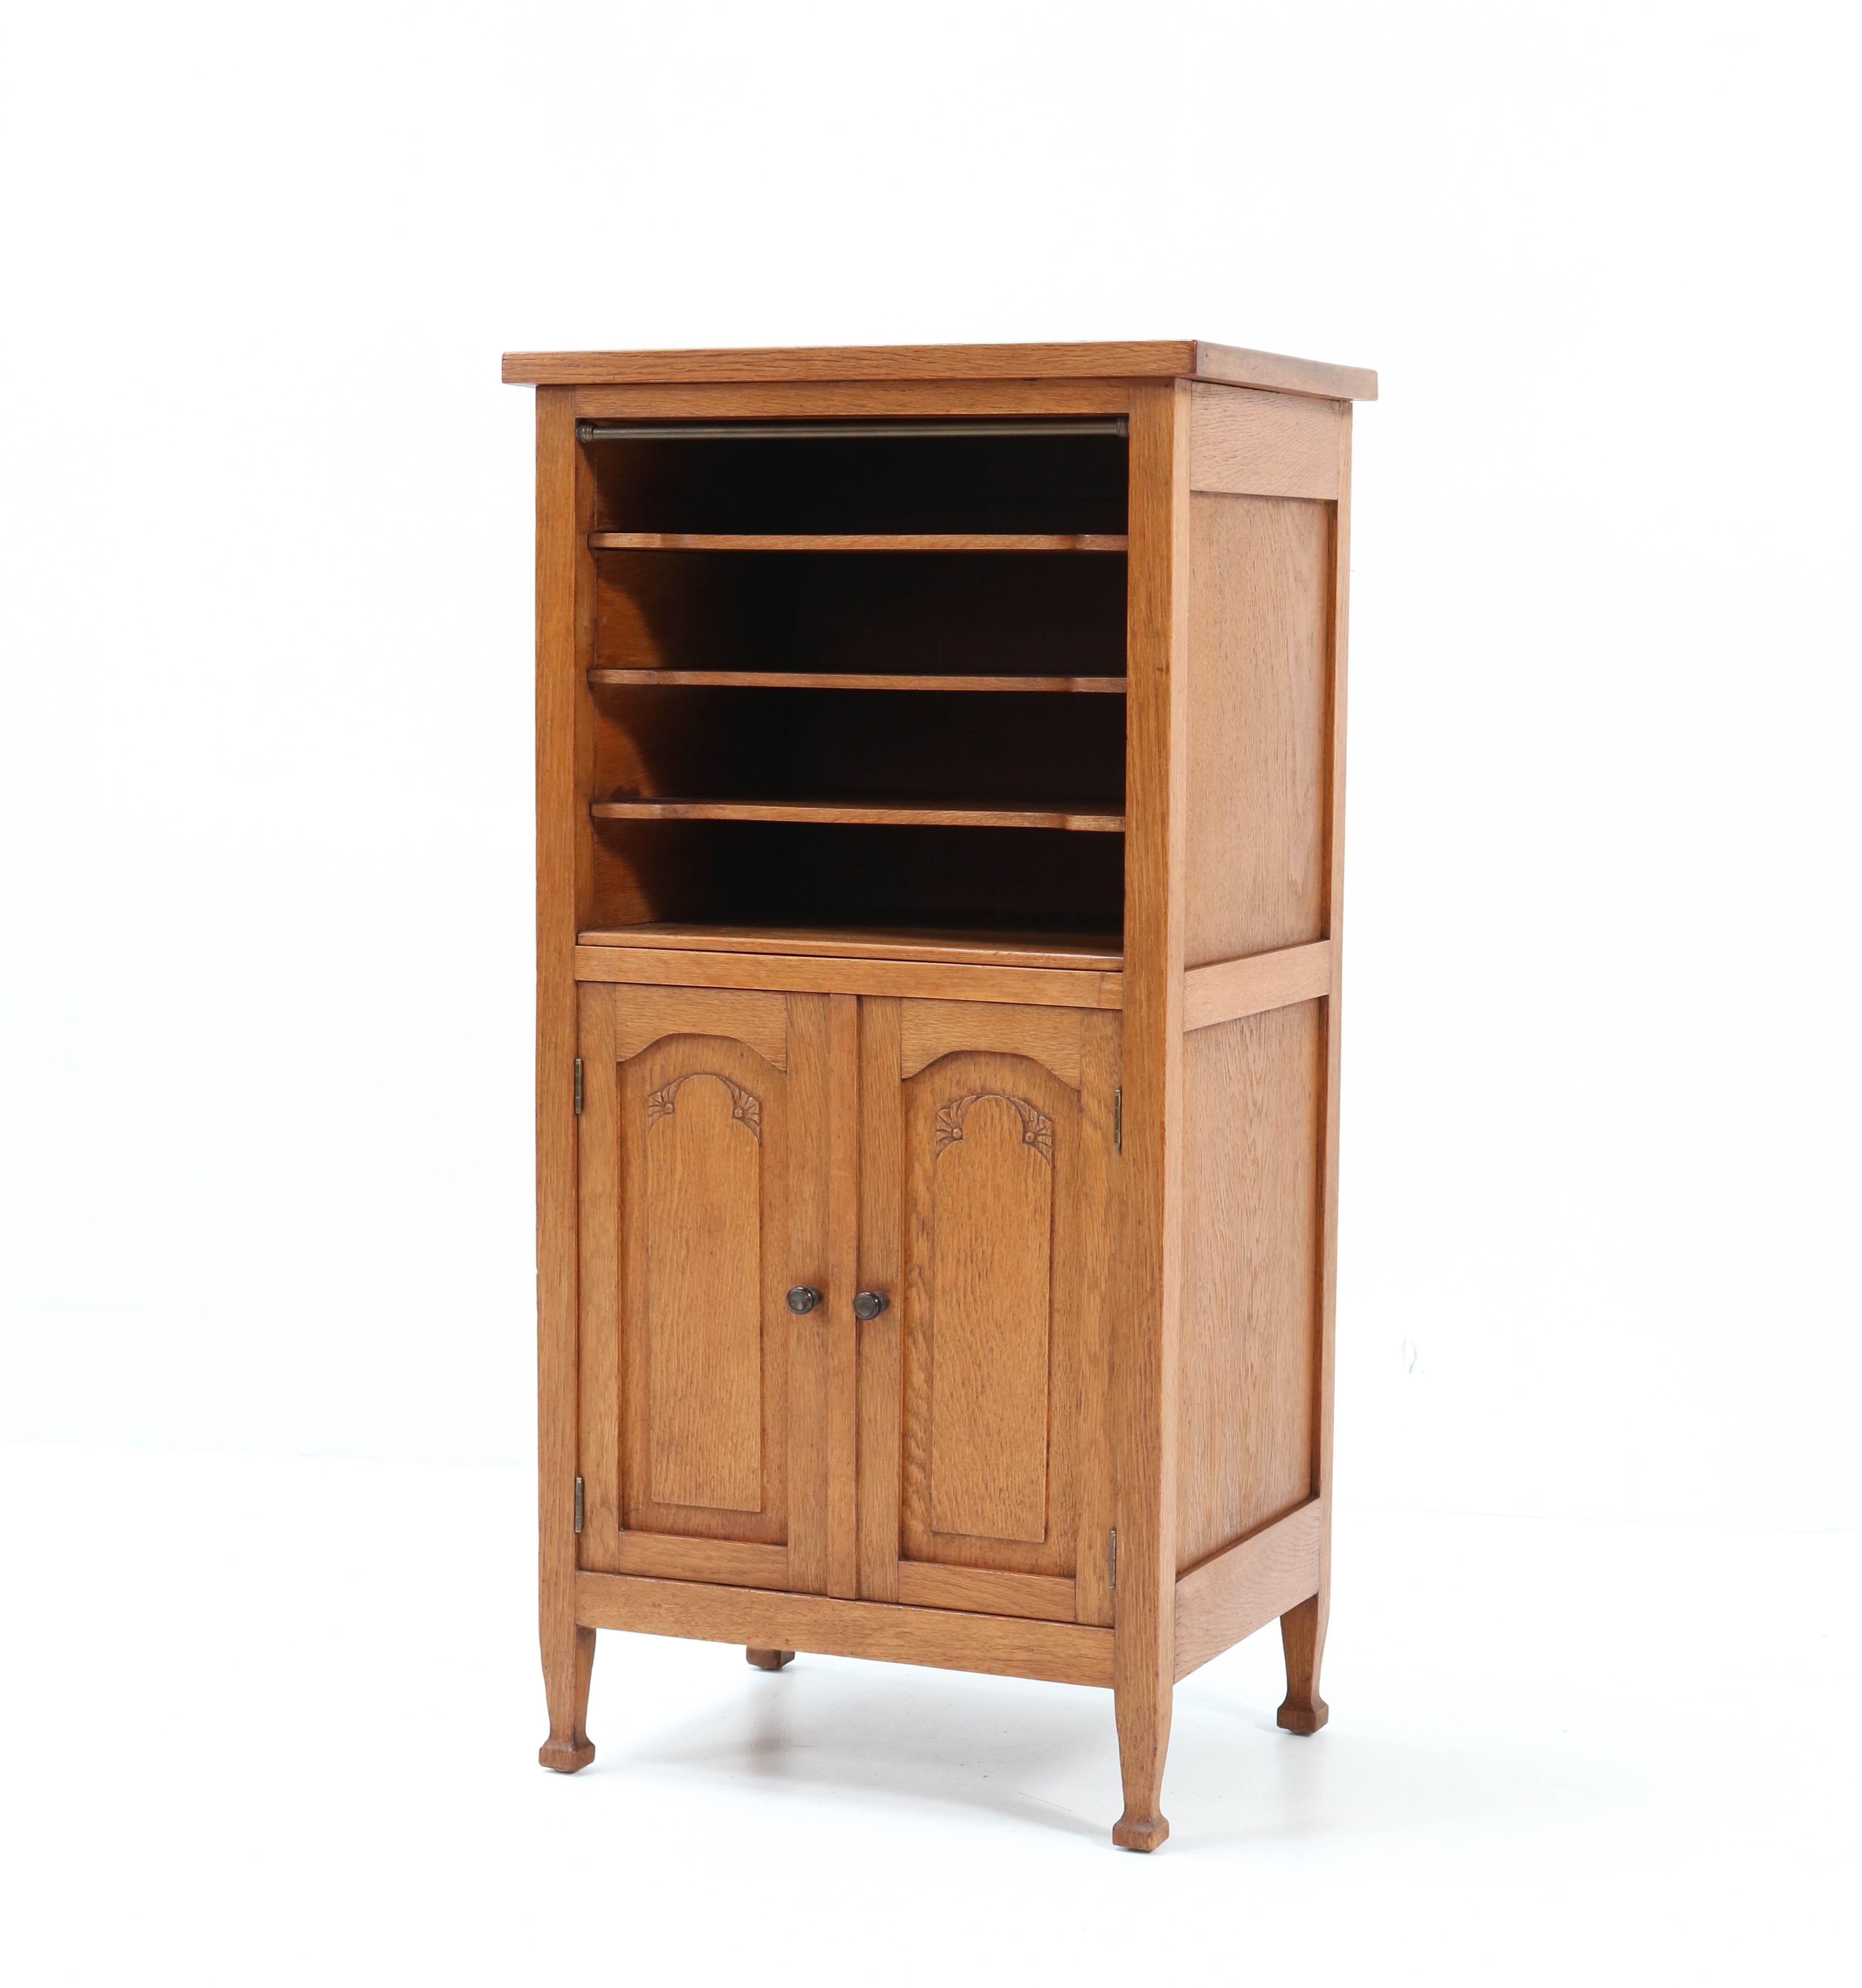 Wonderful and rare Art Nouveau Arts & Crafts cabinet.
Striking Dutch design from the 1900s.
Solid oak with solid Macassar ebony knobs on the doors.
Rare because of its size and quality!
In very good condition with a beautiful patina.